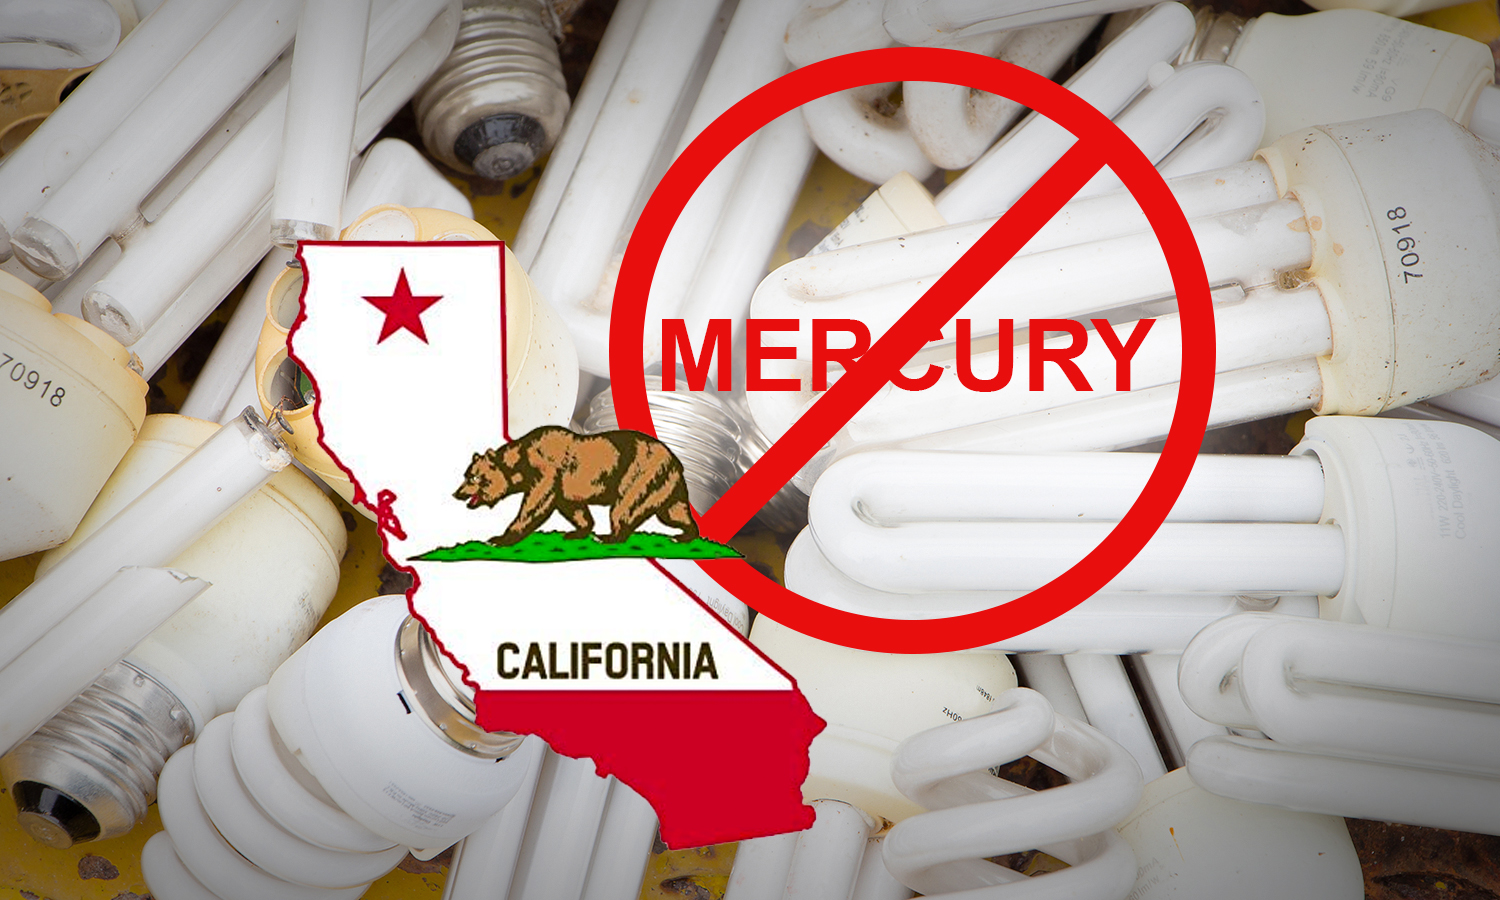 fluorescent-bulb-phase-out-california-to-go-beyond-efficiency